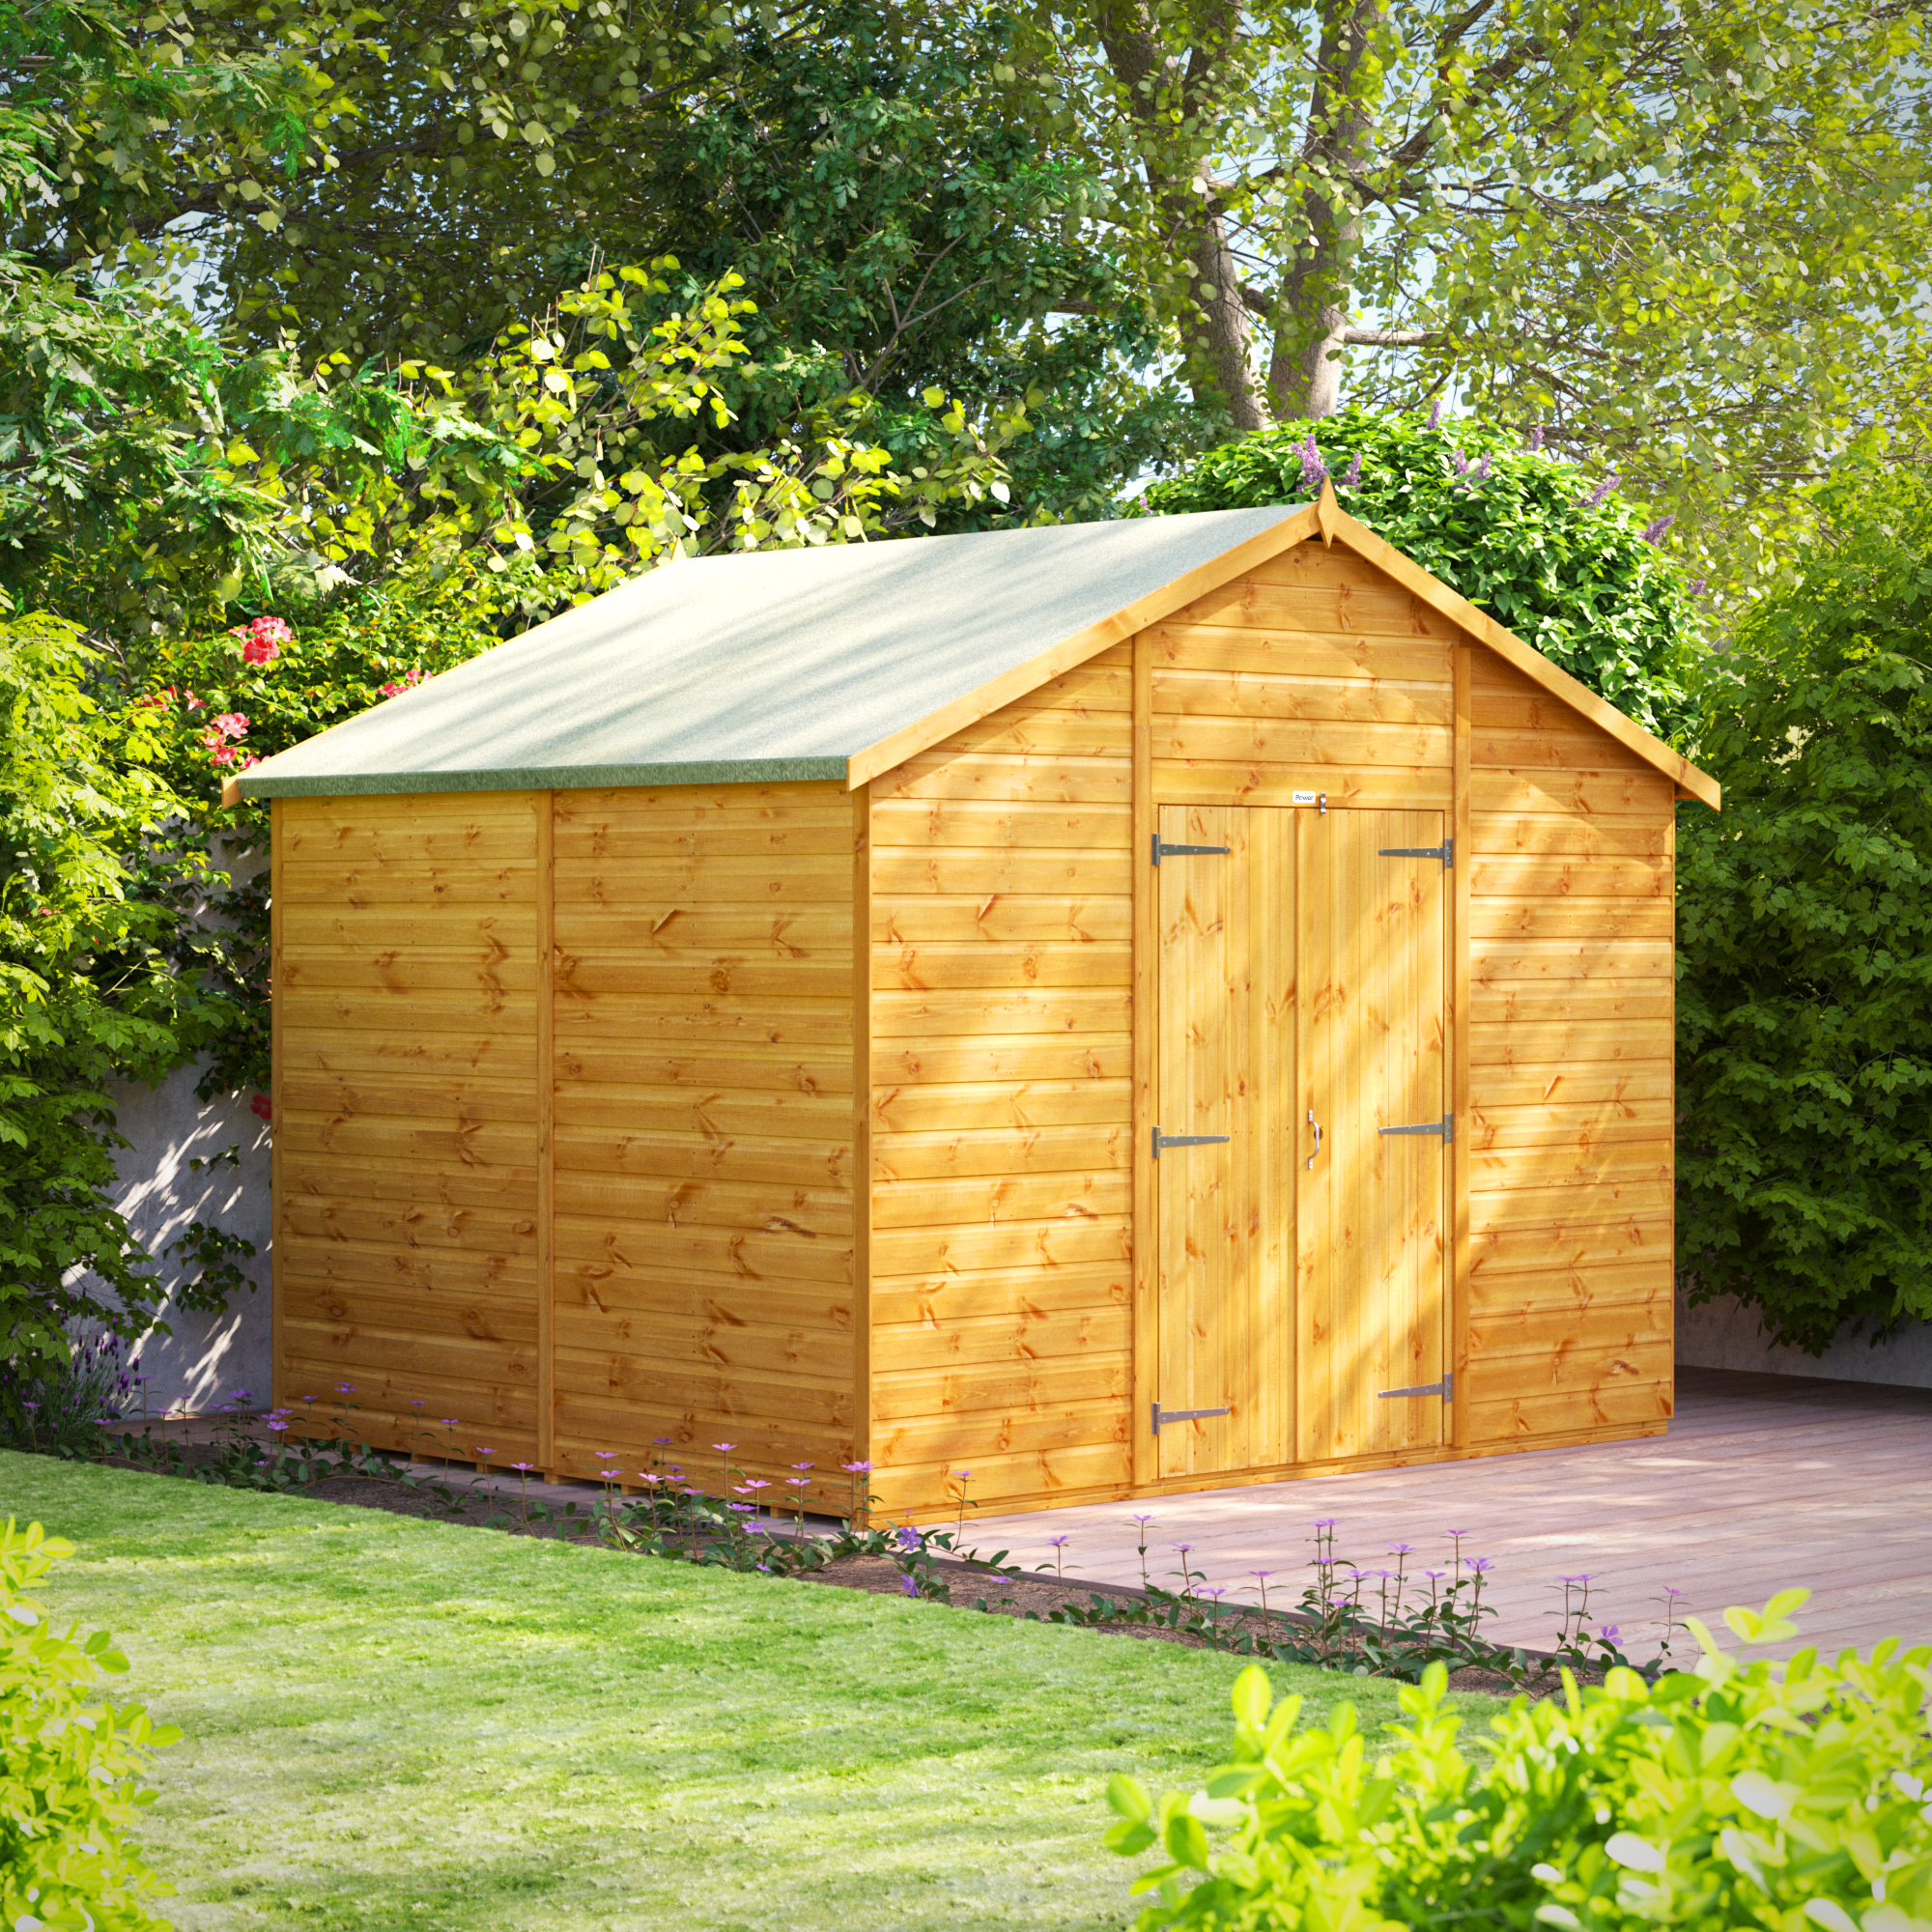 Power Sheds 8 x 10ft Double Door Apex Shiplap Dip Treated Windowless Shed